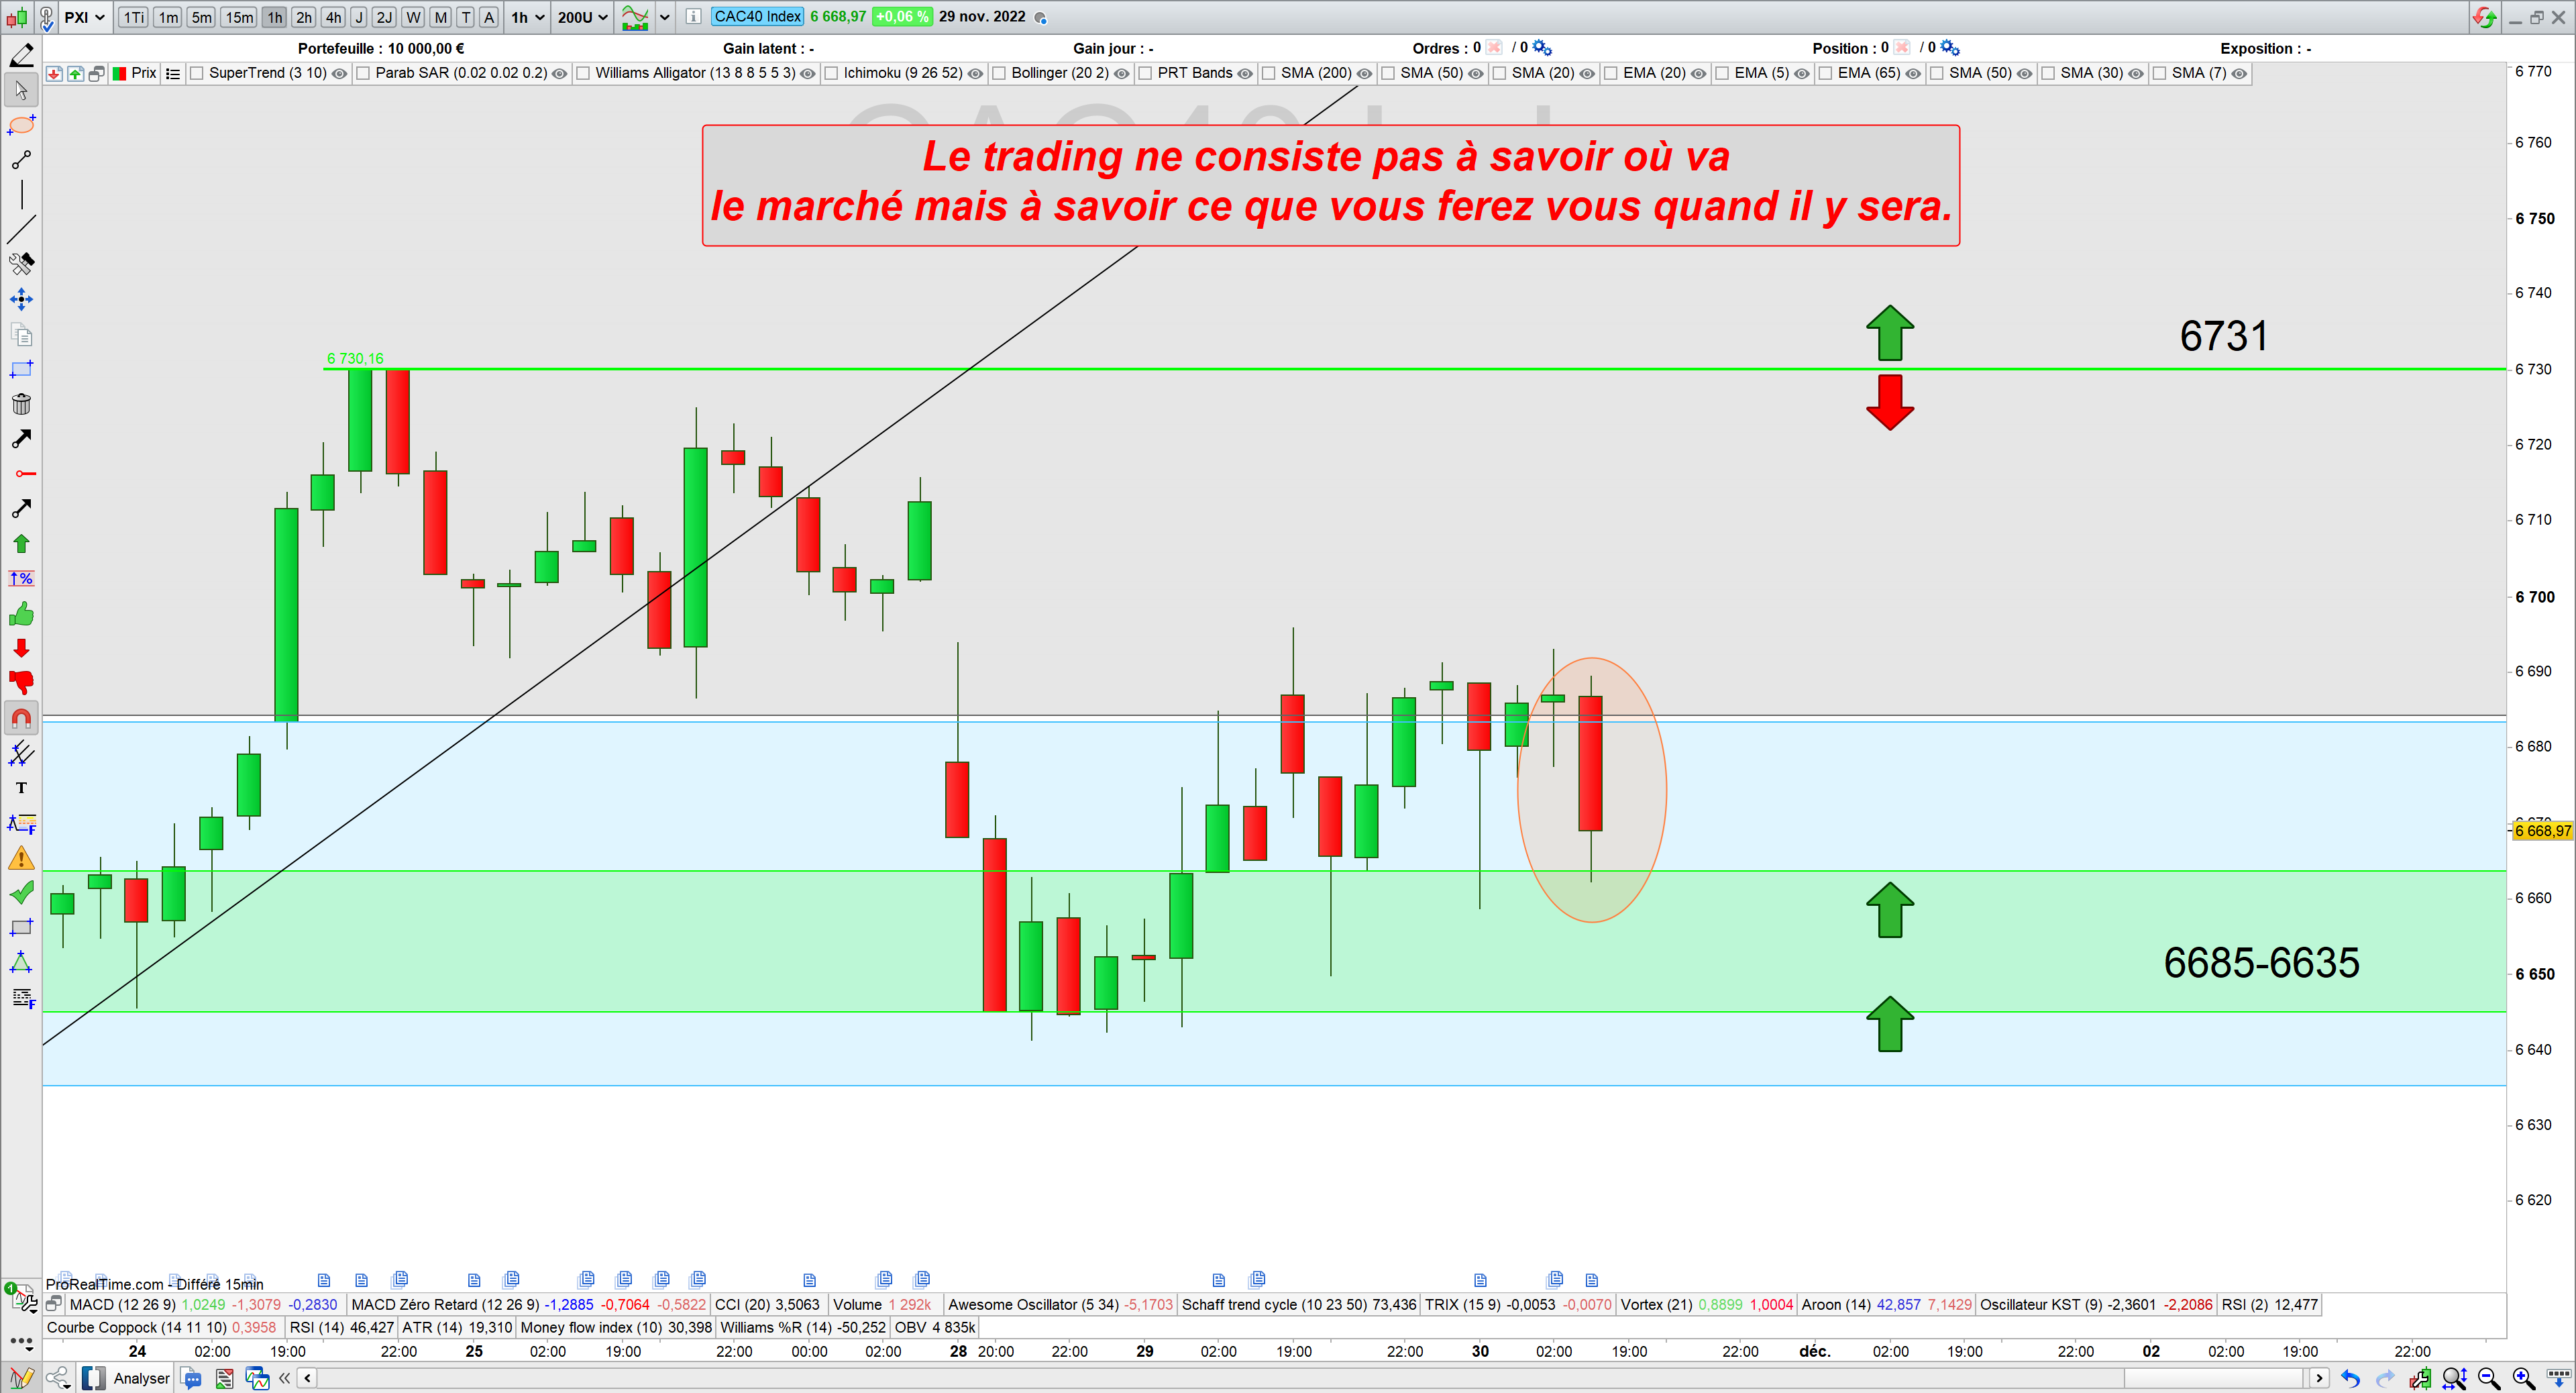 Trading cac40 30/11/22